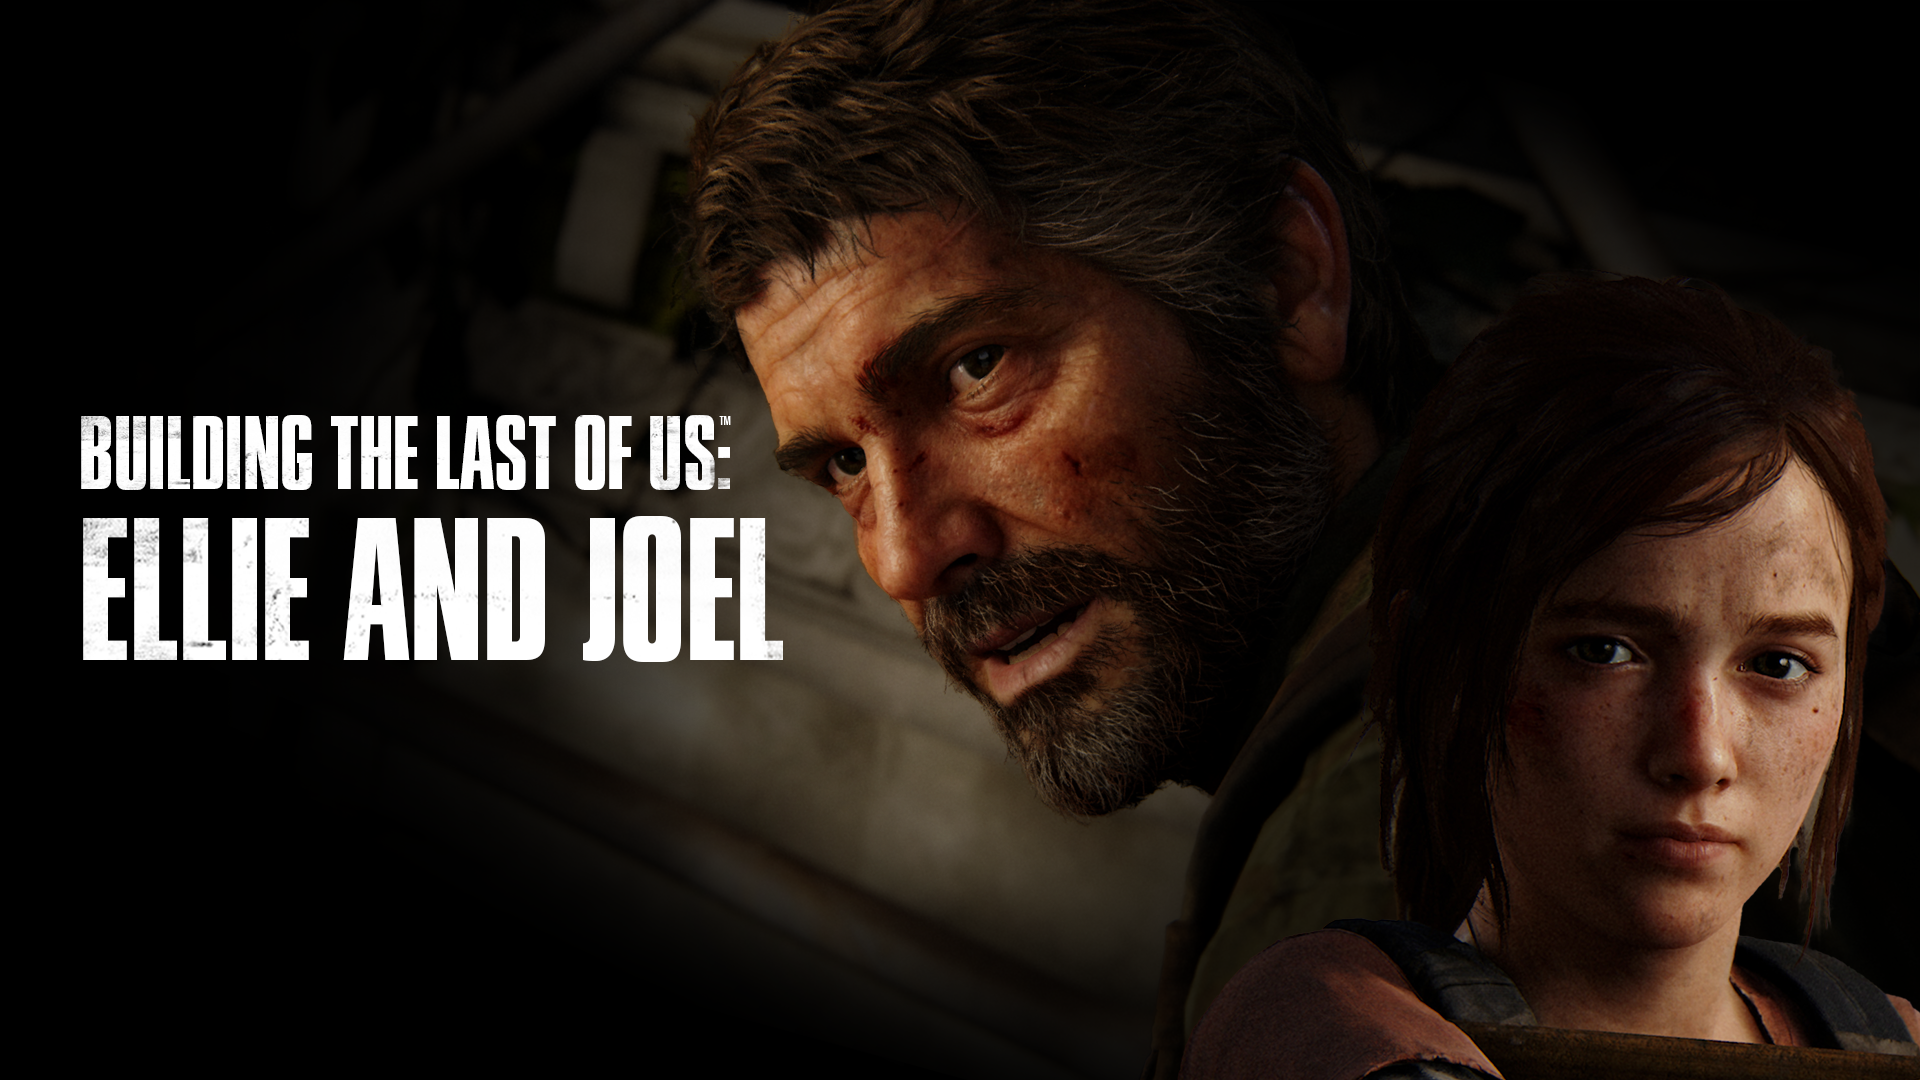 The Last of Us: Bringing Ellie and Joel’s Story to Life in Game and Show